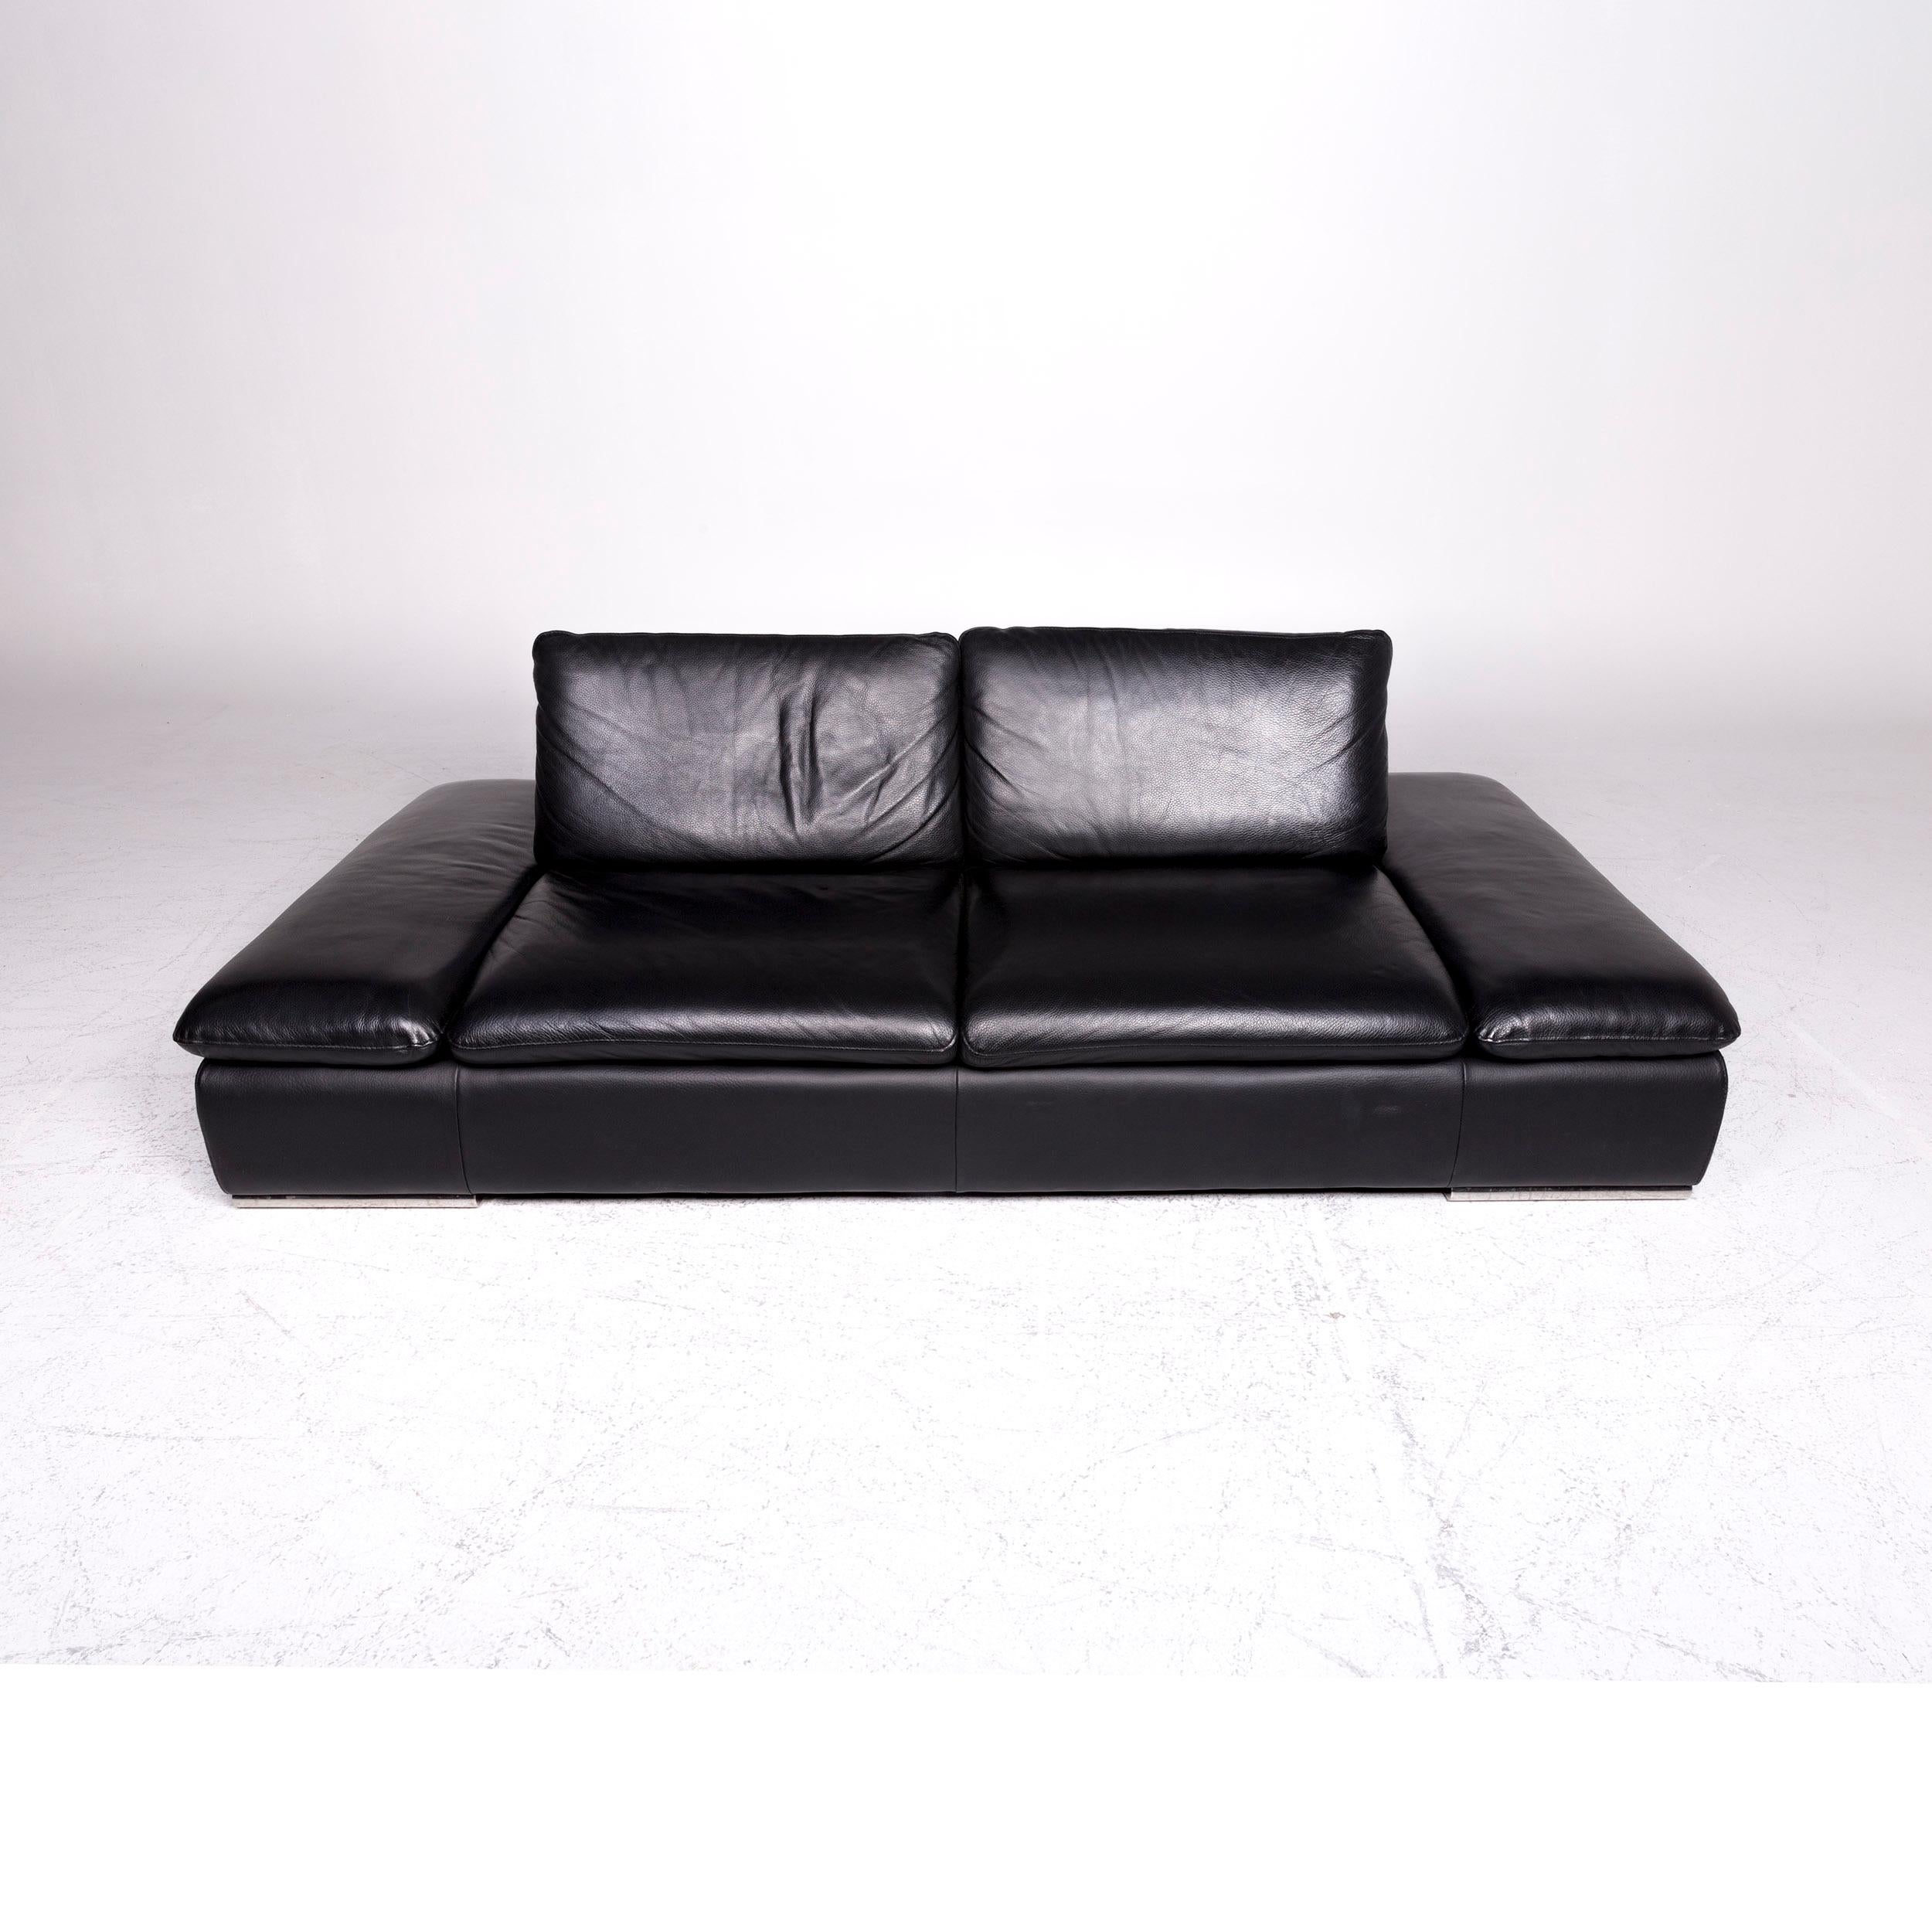 Koinor Evento Designer Leather Sofa Black Two-Seat Couch 1